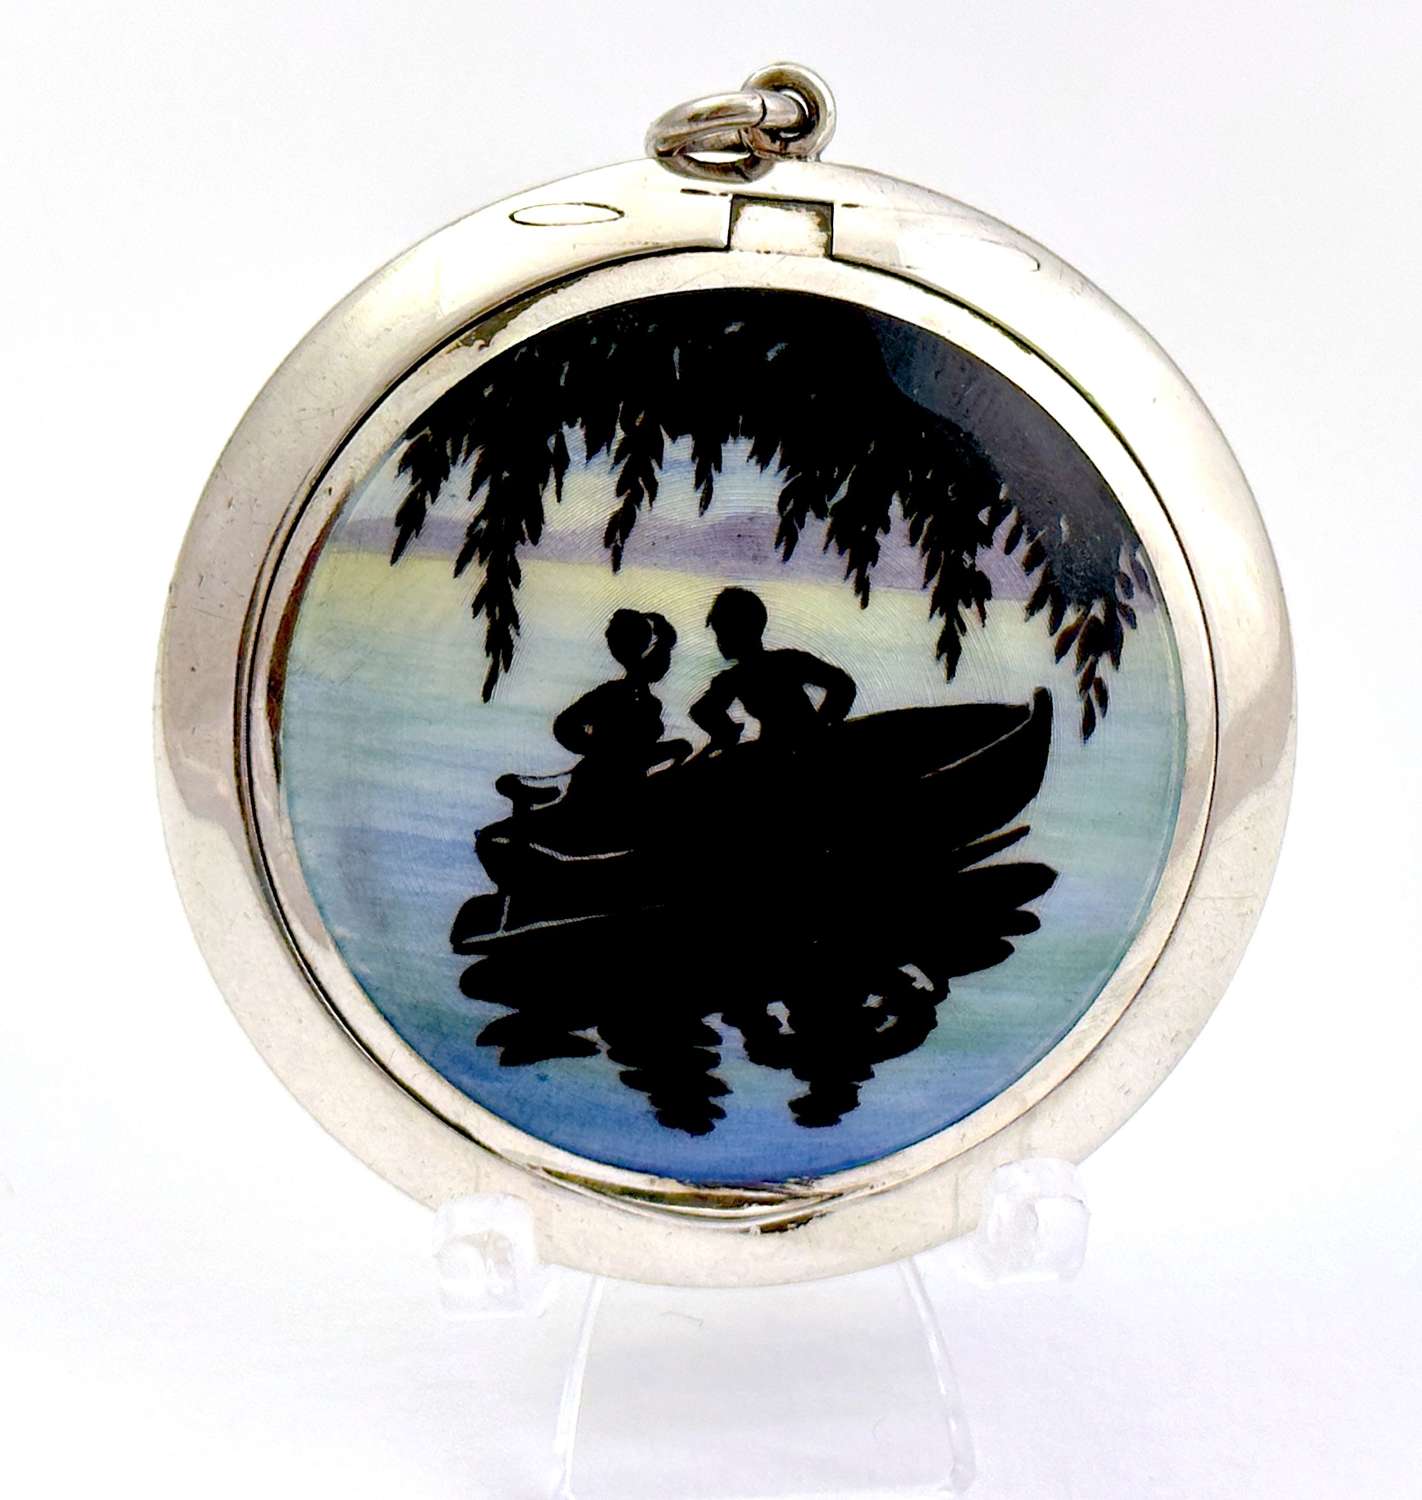 Antique  Enamel & Silver Compact with a Silhouette Romantic Scene